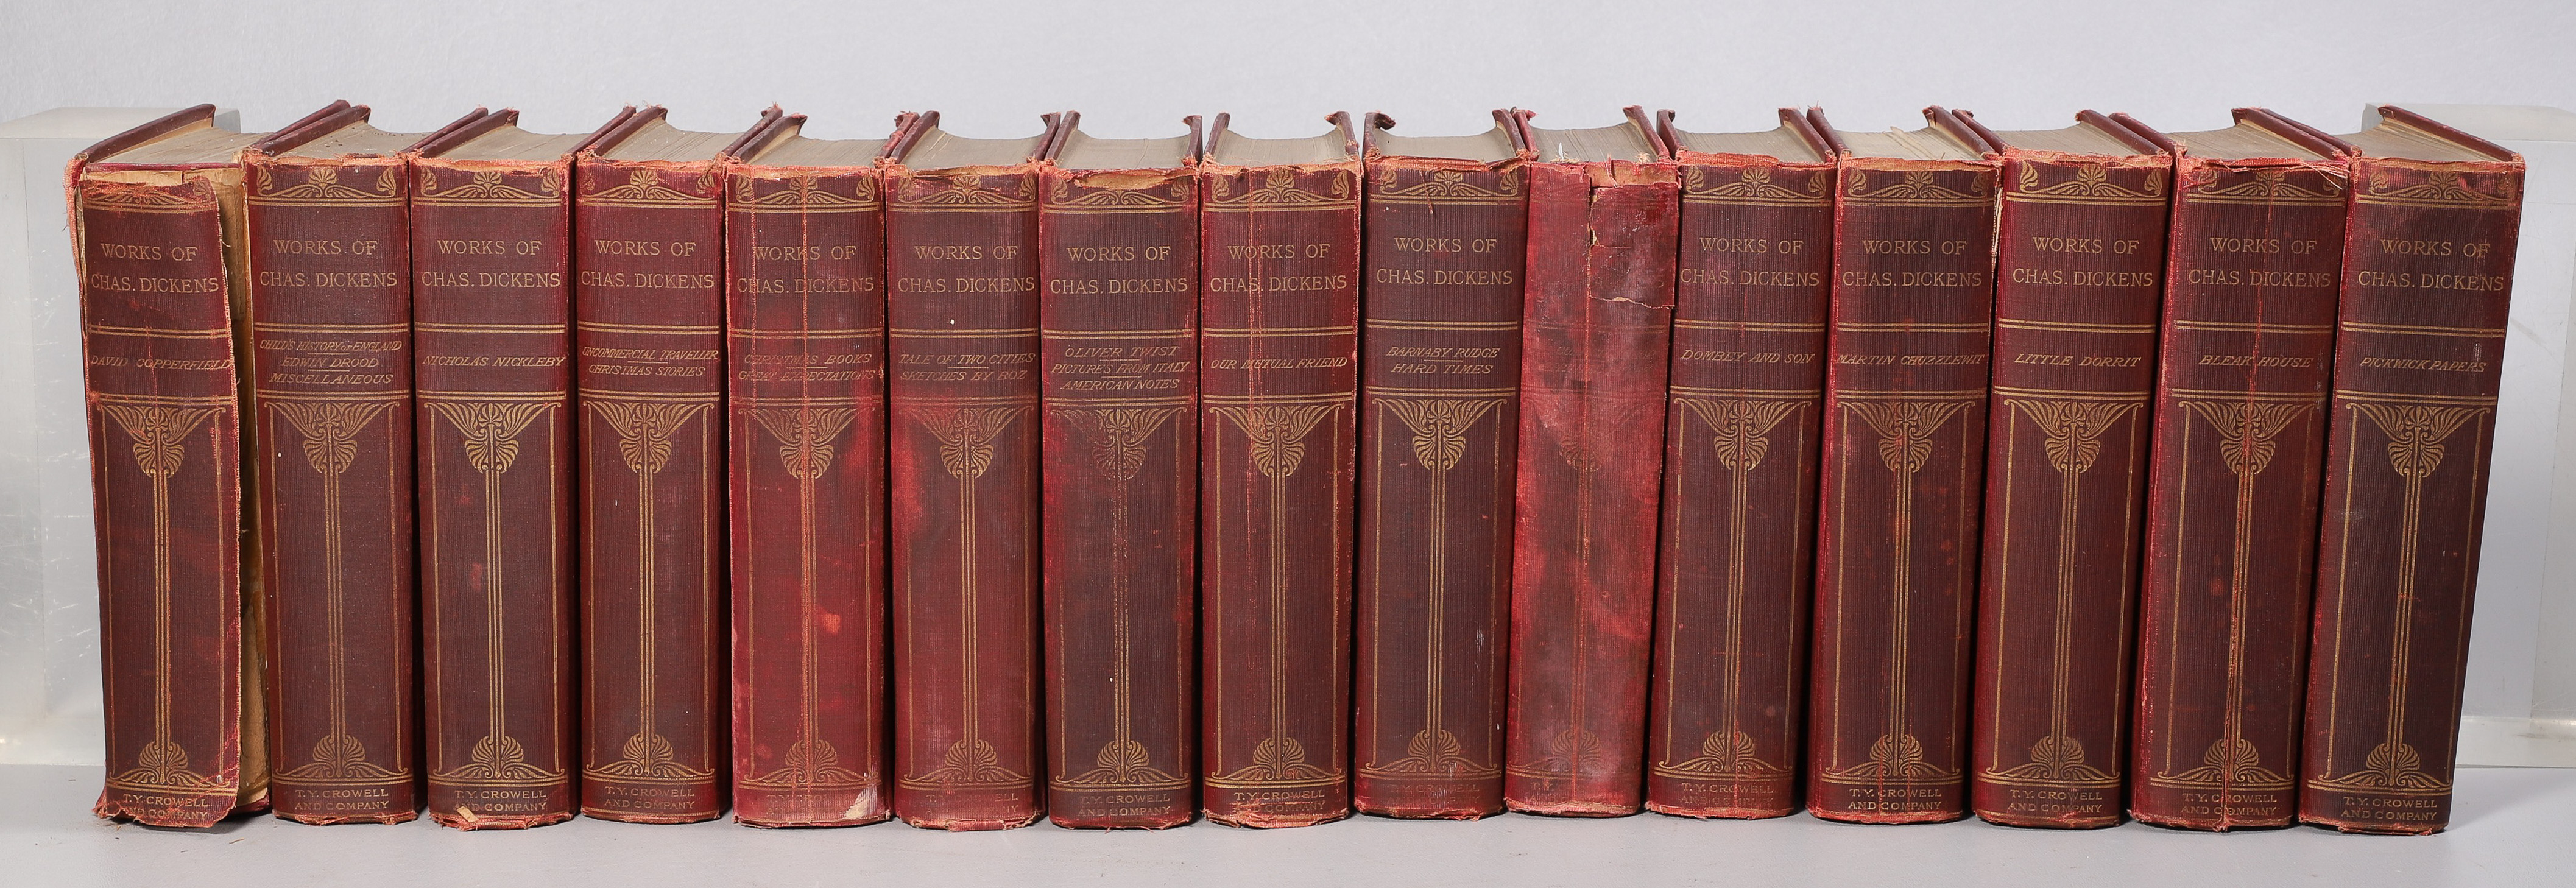 Fifteen volumes of the Works of